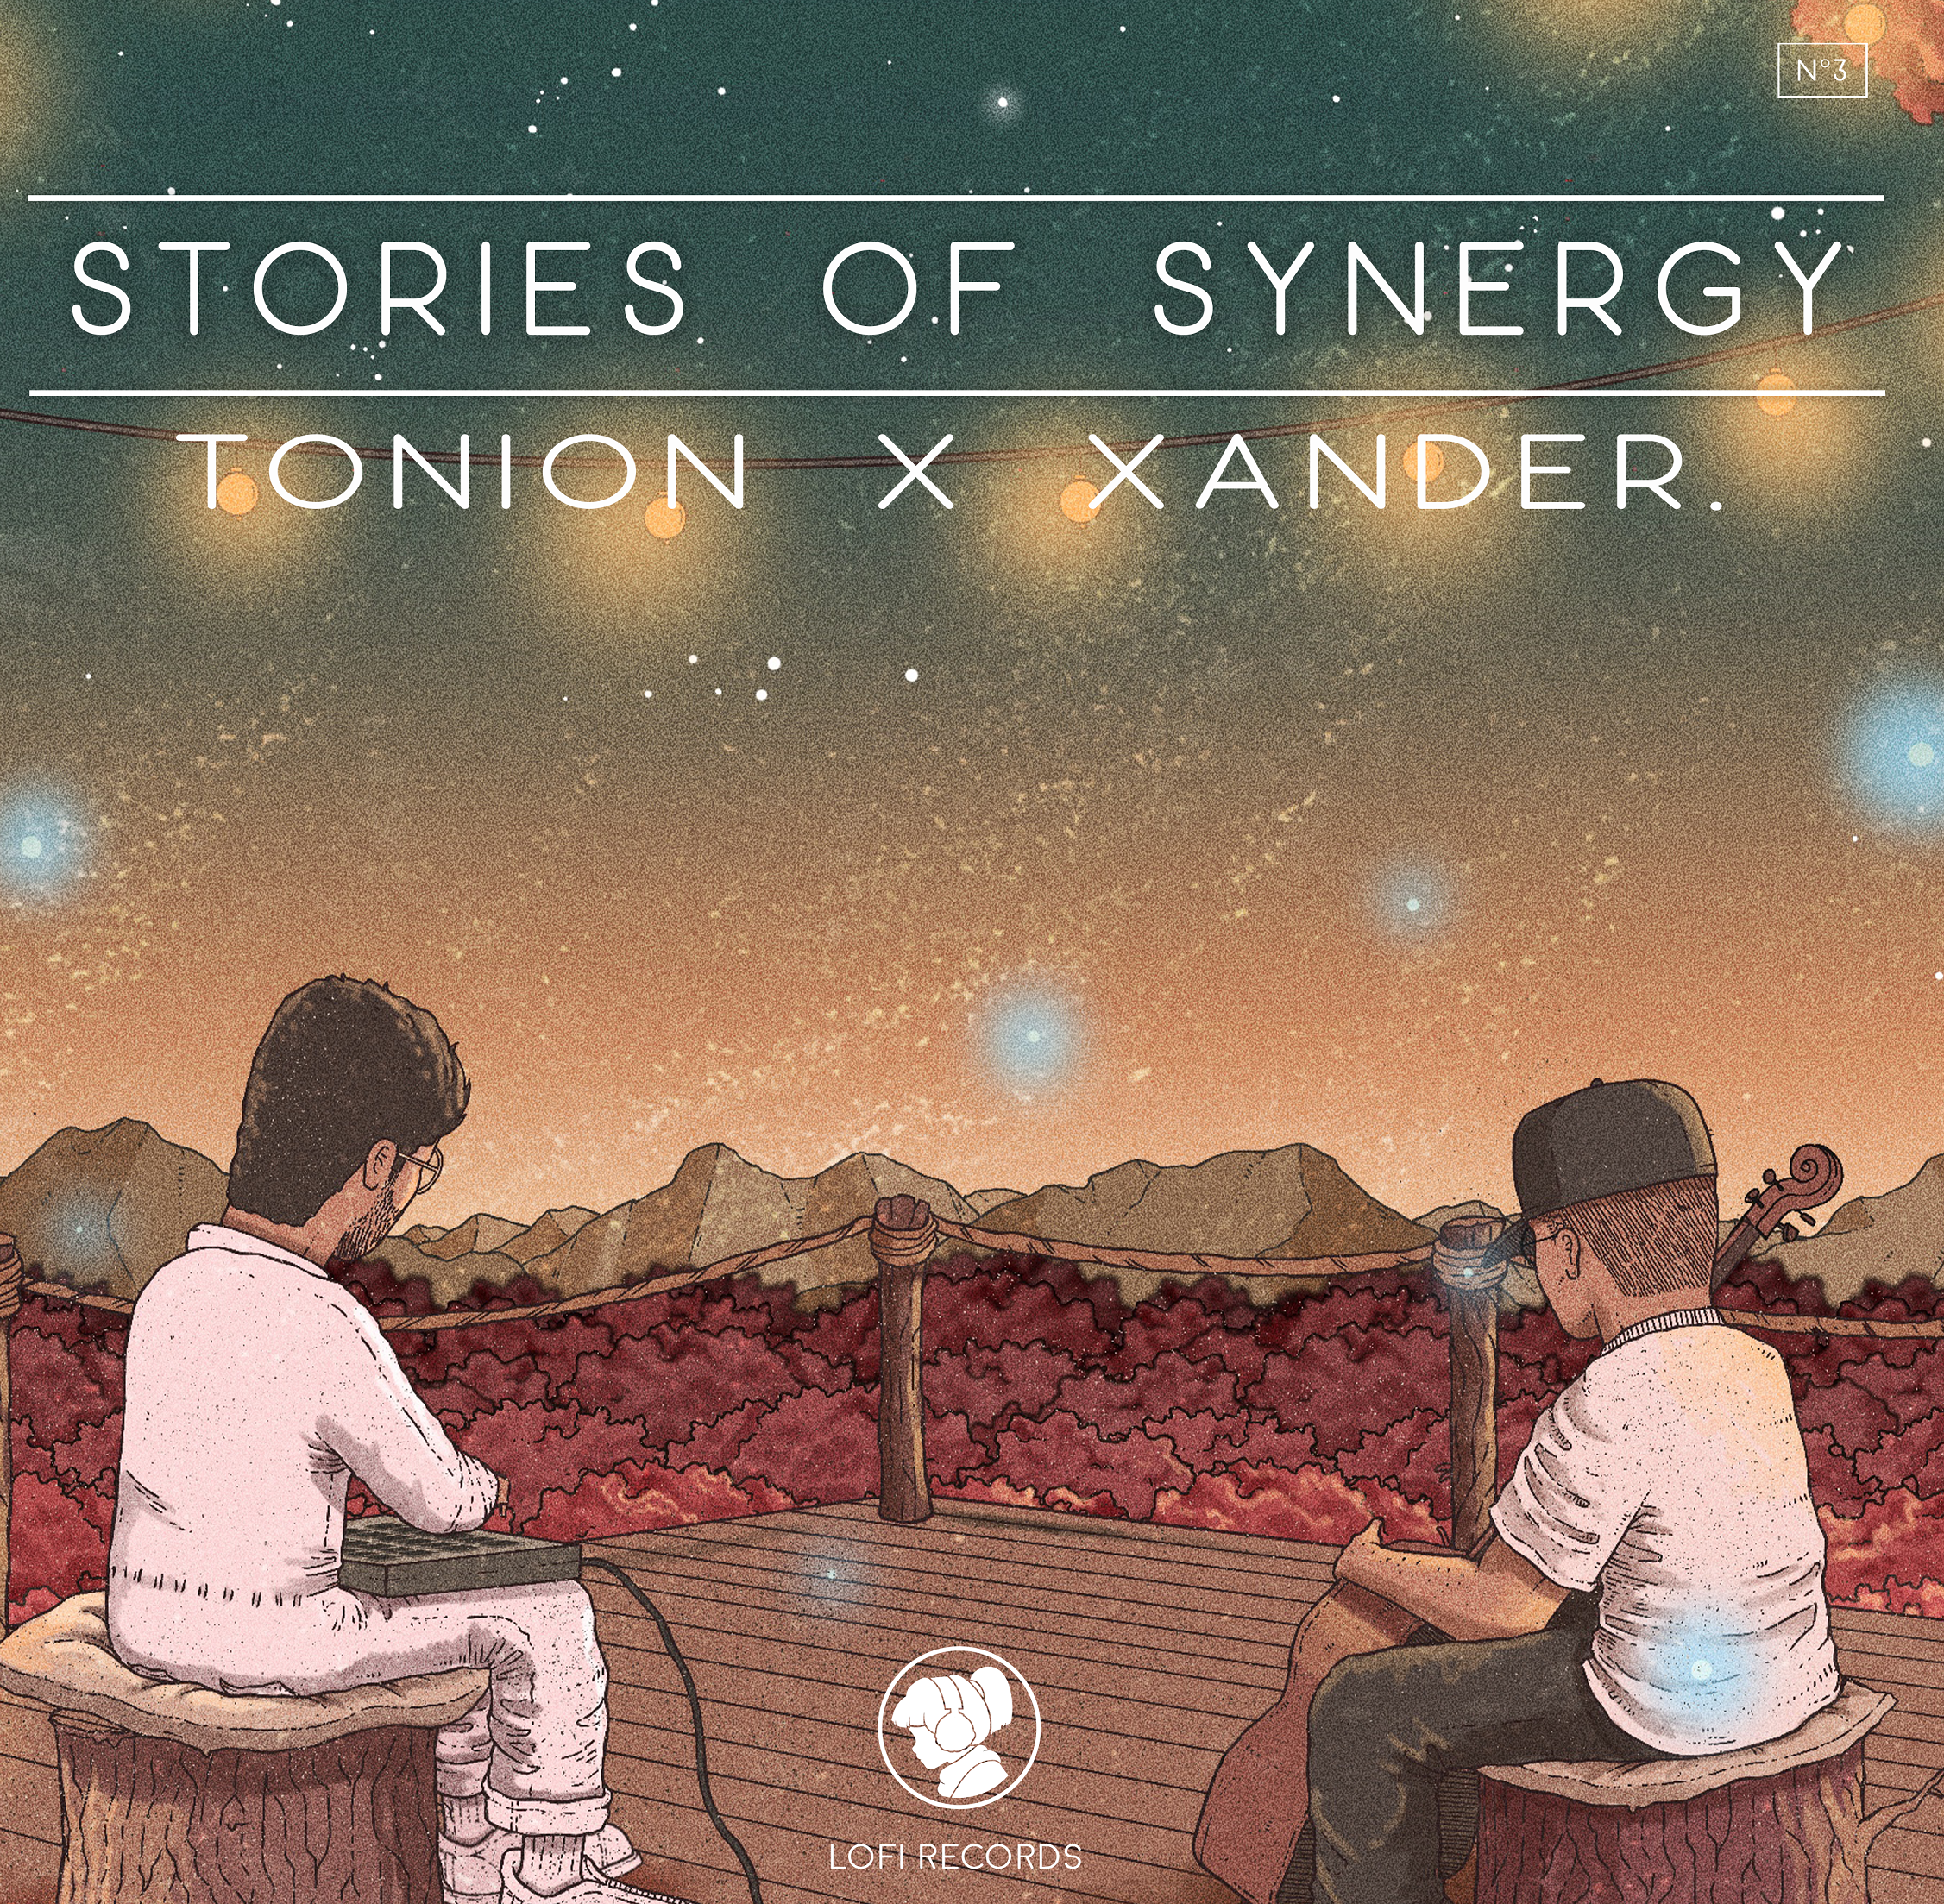 Stories of Synergy - Tonion x xander.